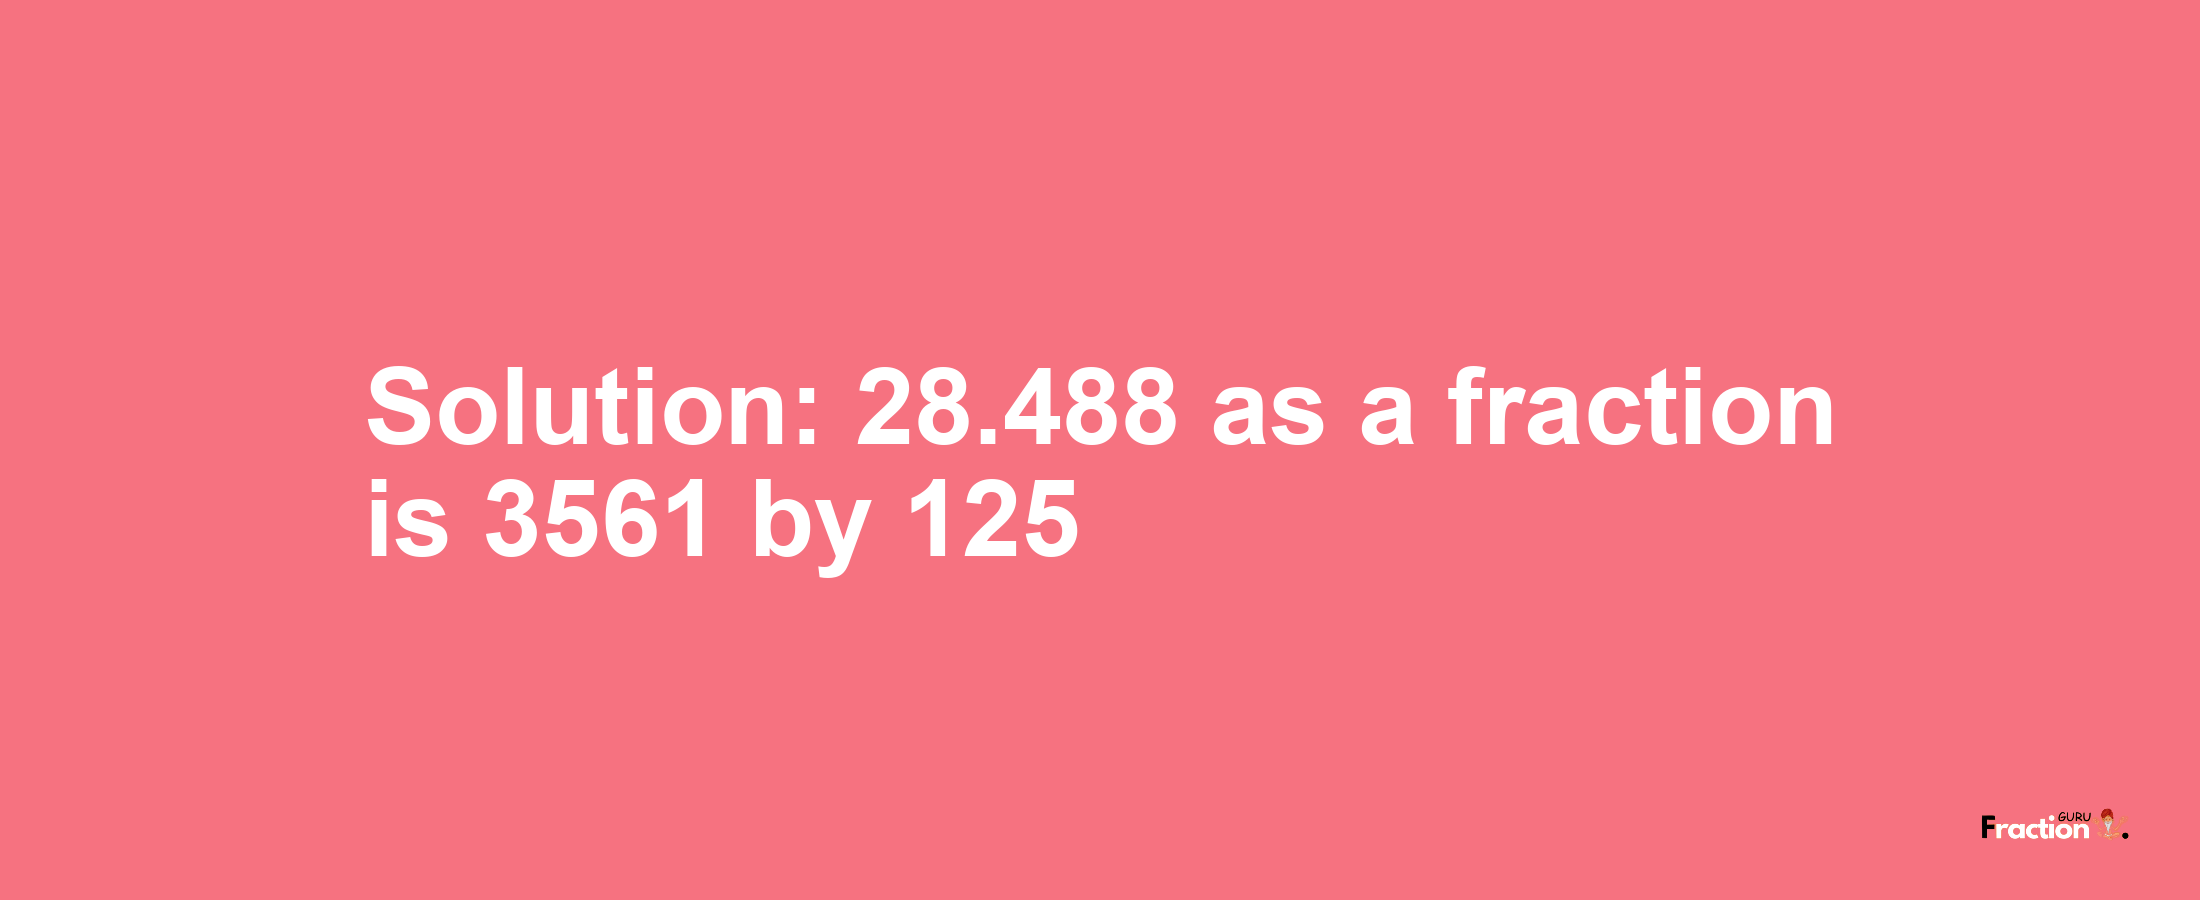 Solution:28.488 as a fraction is 3561/125